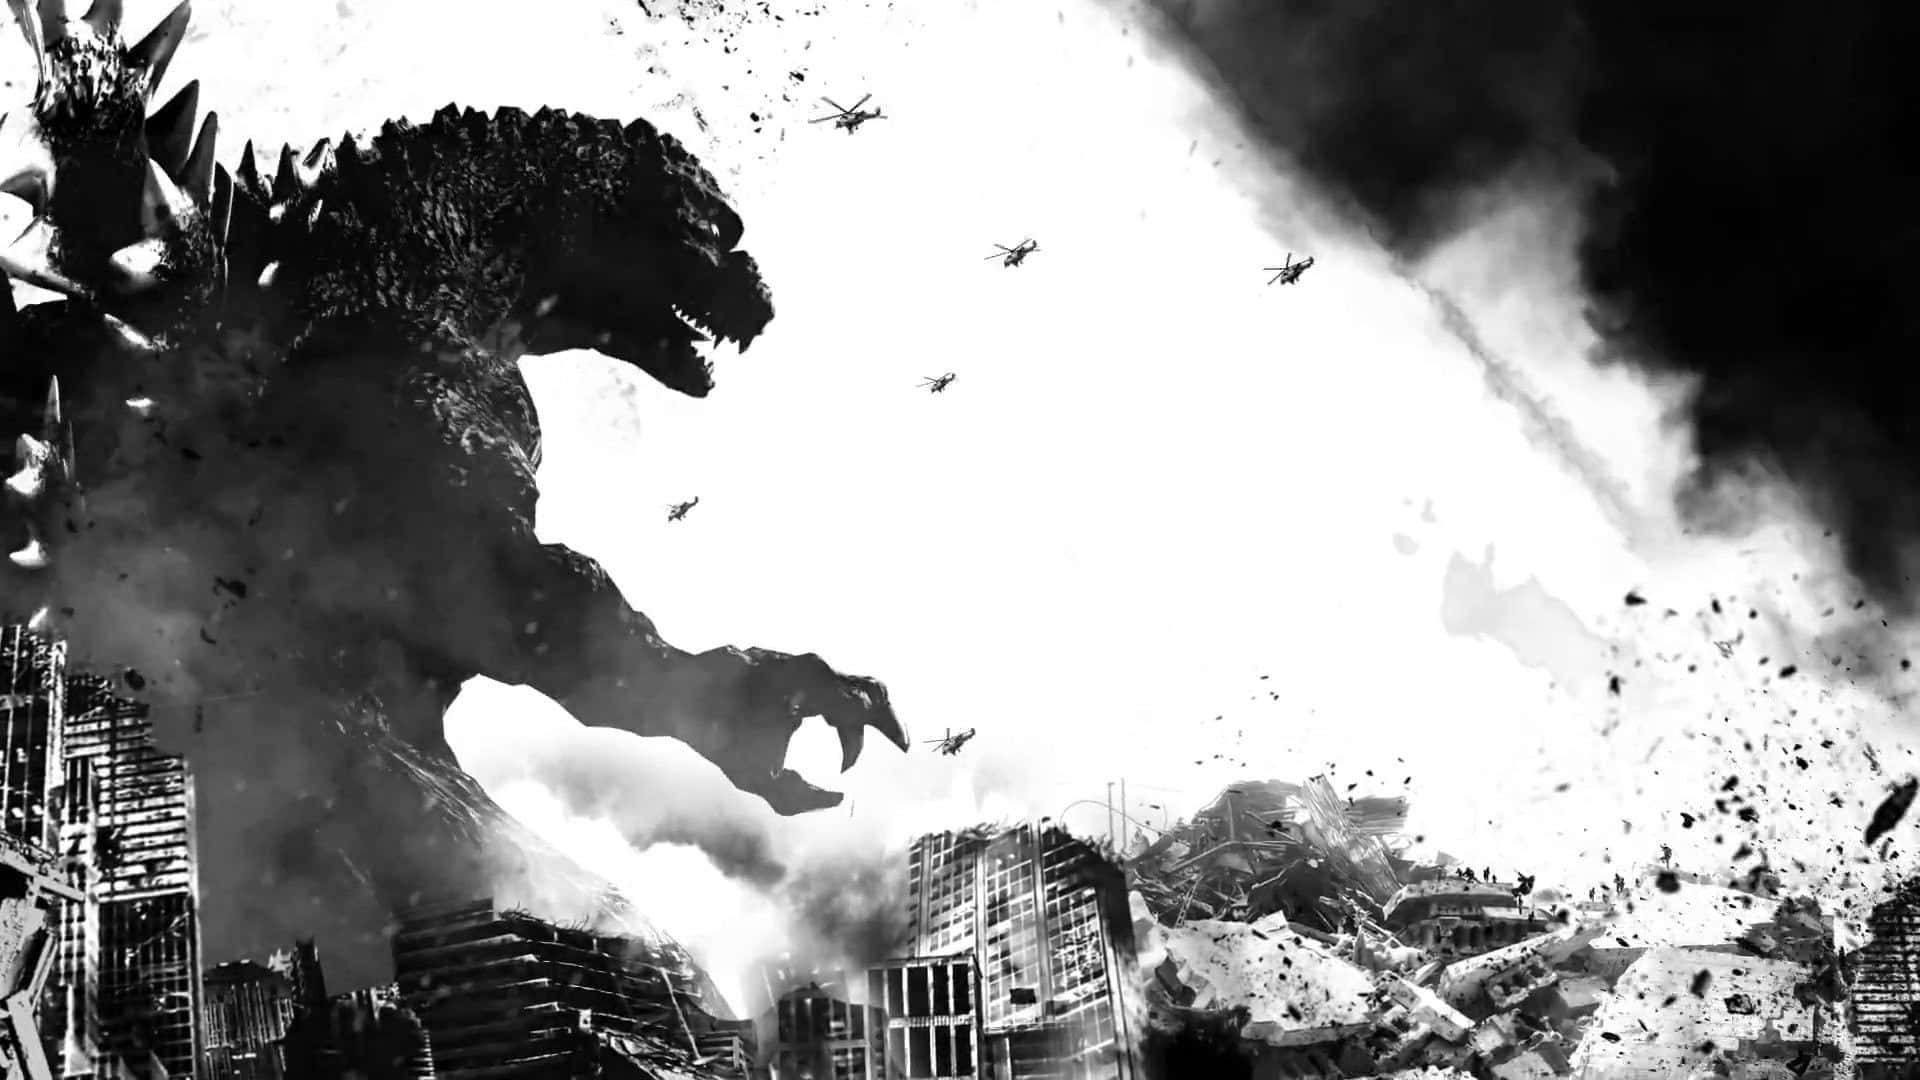 First appearance of Godzilla from the iconic 1954 film Wallpaper